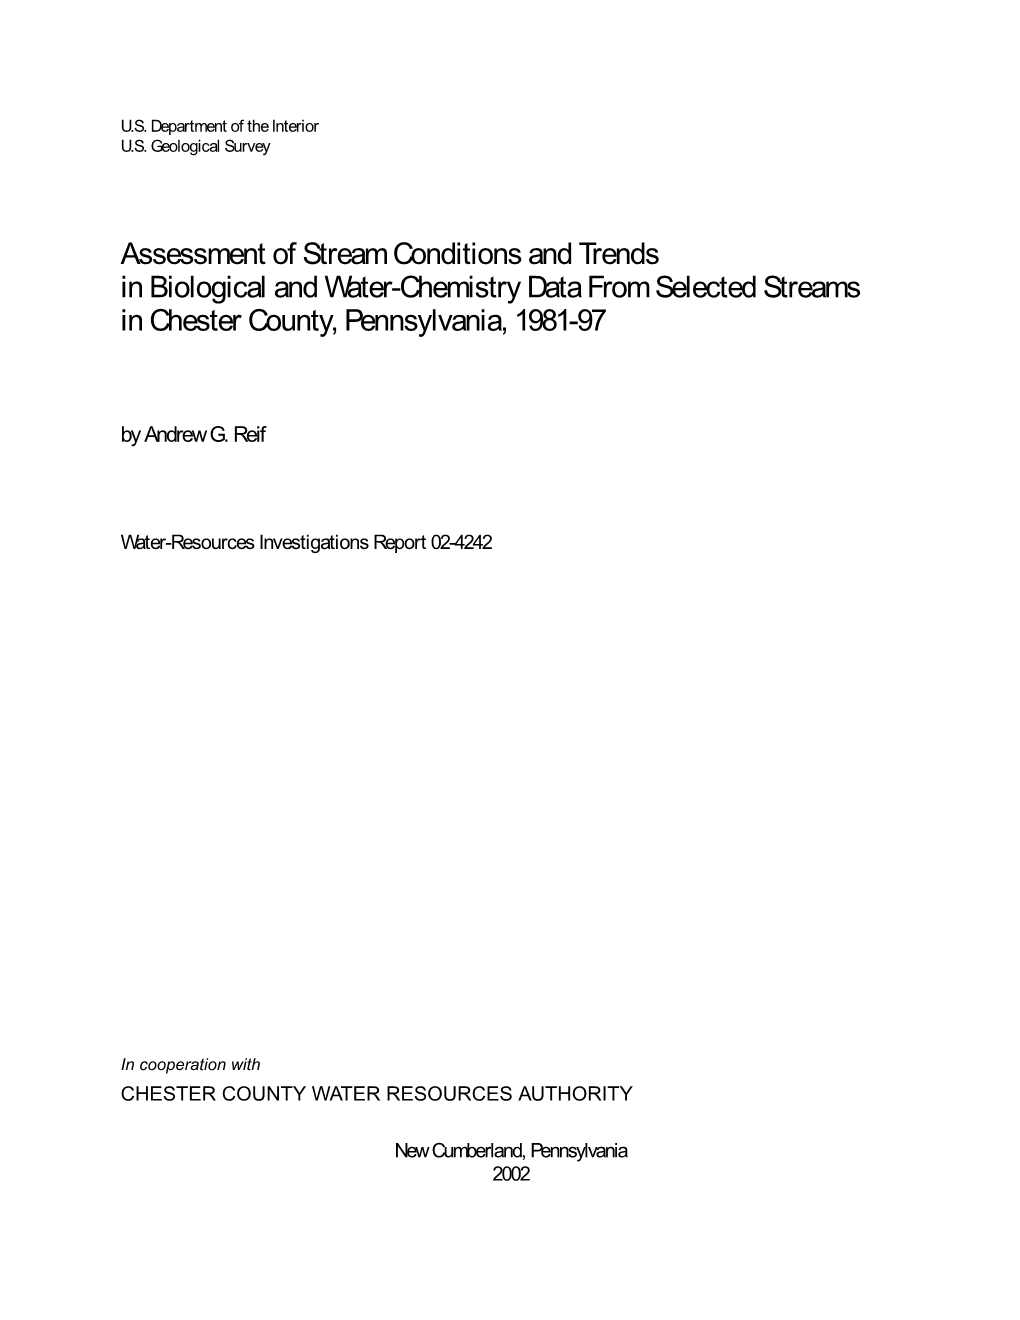 Assessment of Stream Conditions and Trends in Biological and Water-Chemistry Data from Selected Streams in Chester County, Pennsylvania, 1981-97